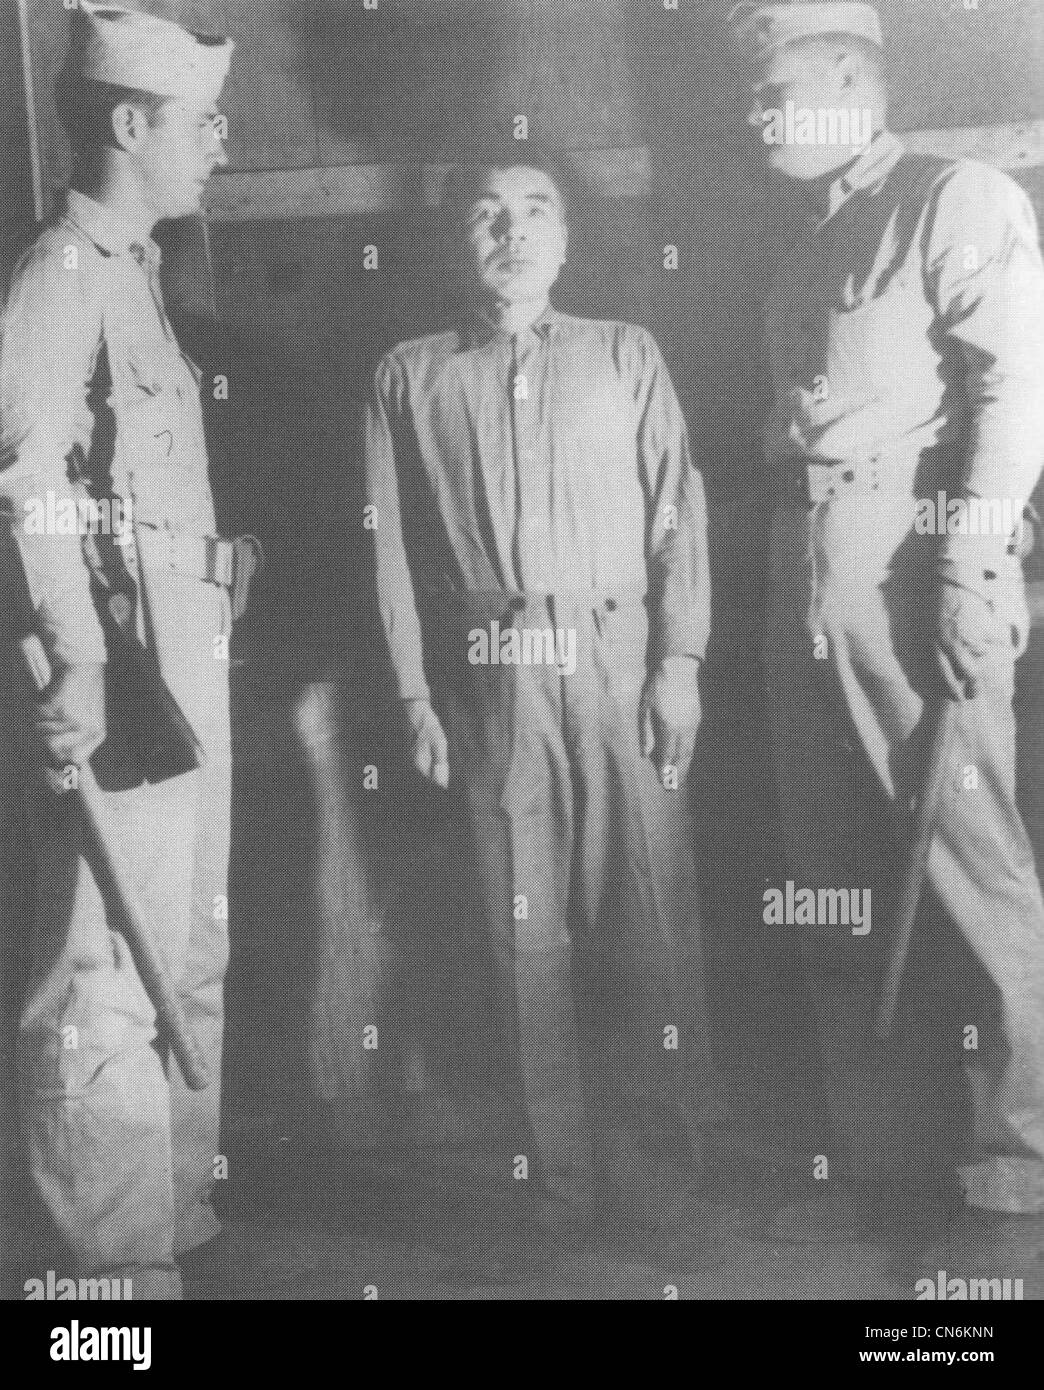 Former Japanese Vice Admiral Koso Abe at the war crimes trial on Guam sometime before his execution in 1947 for the execution of the nine U.S. Marines left behind after the Makin Raid. Stock Photo